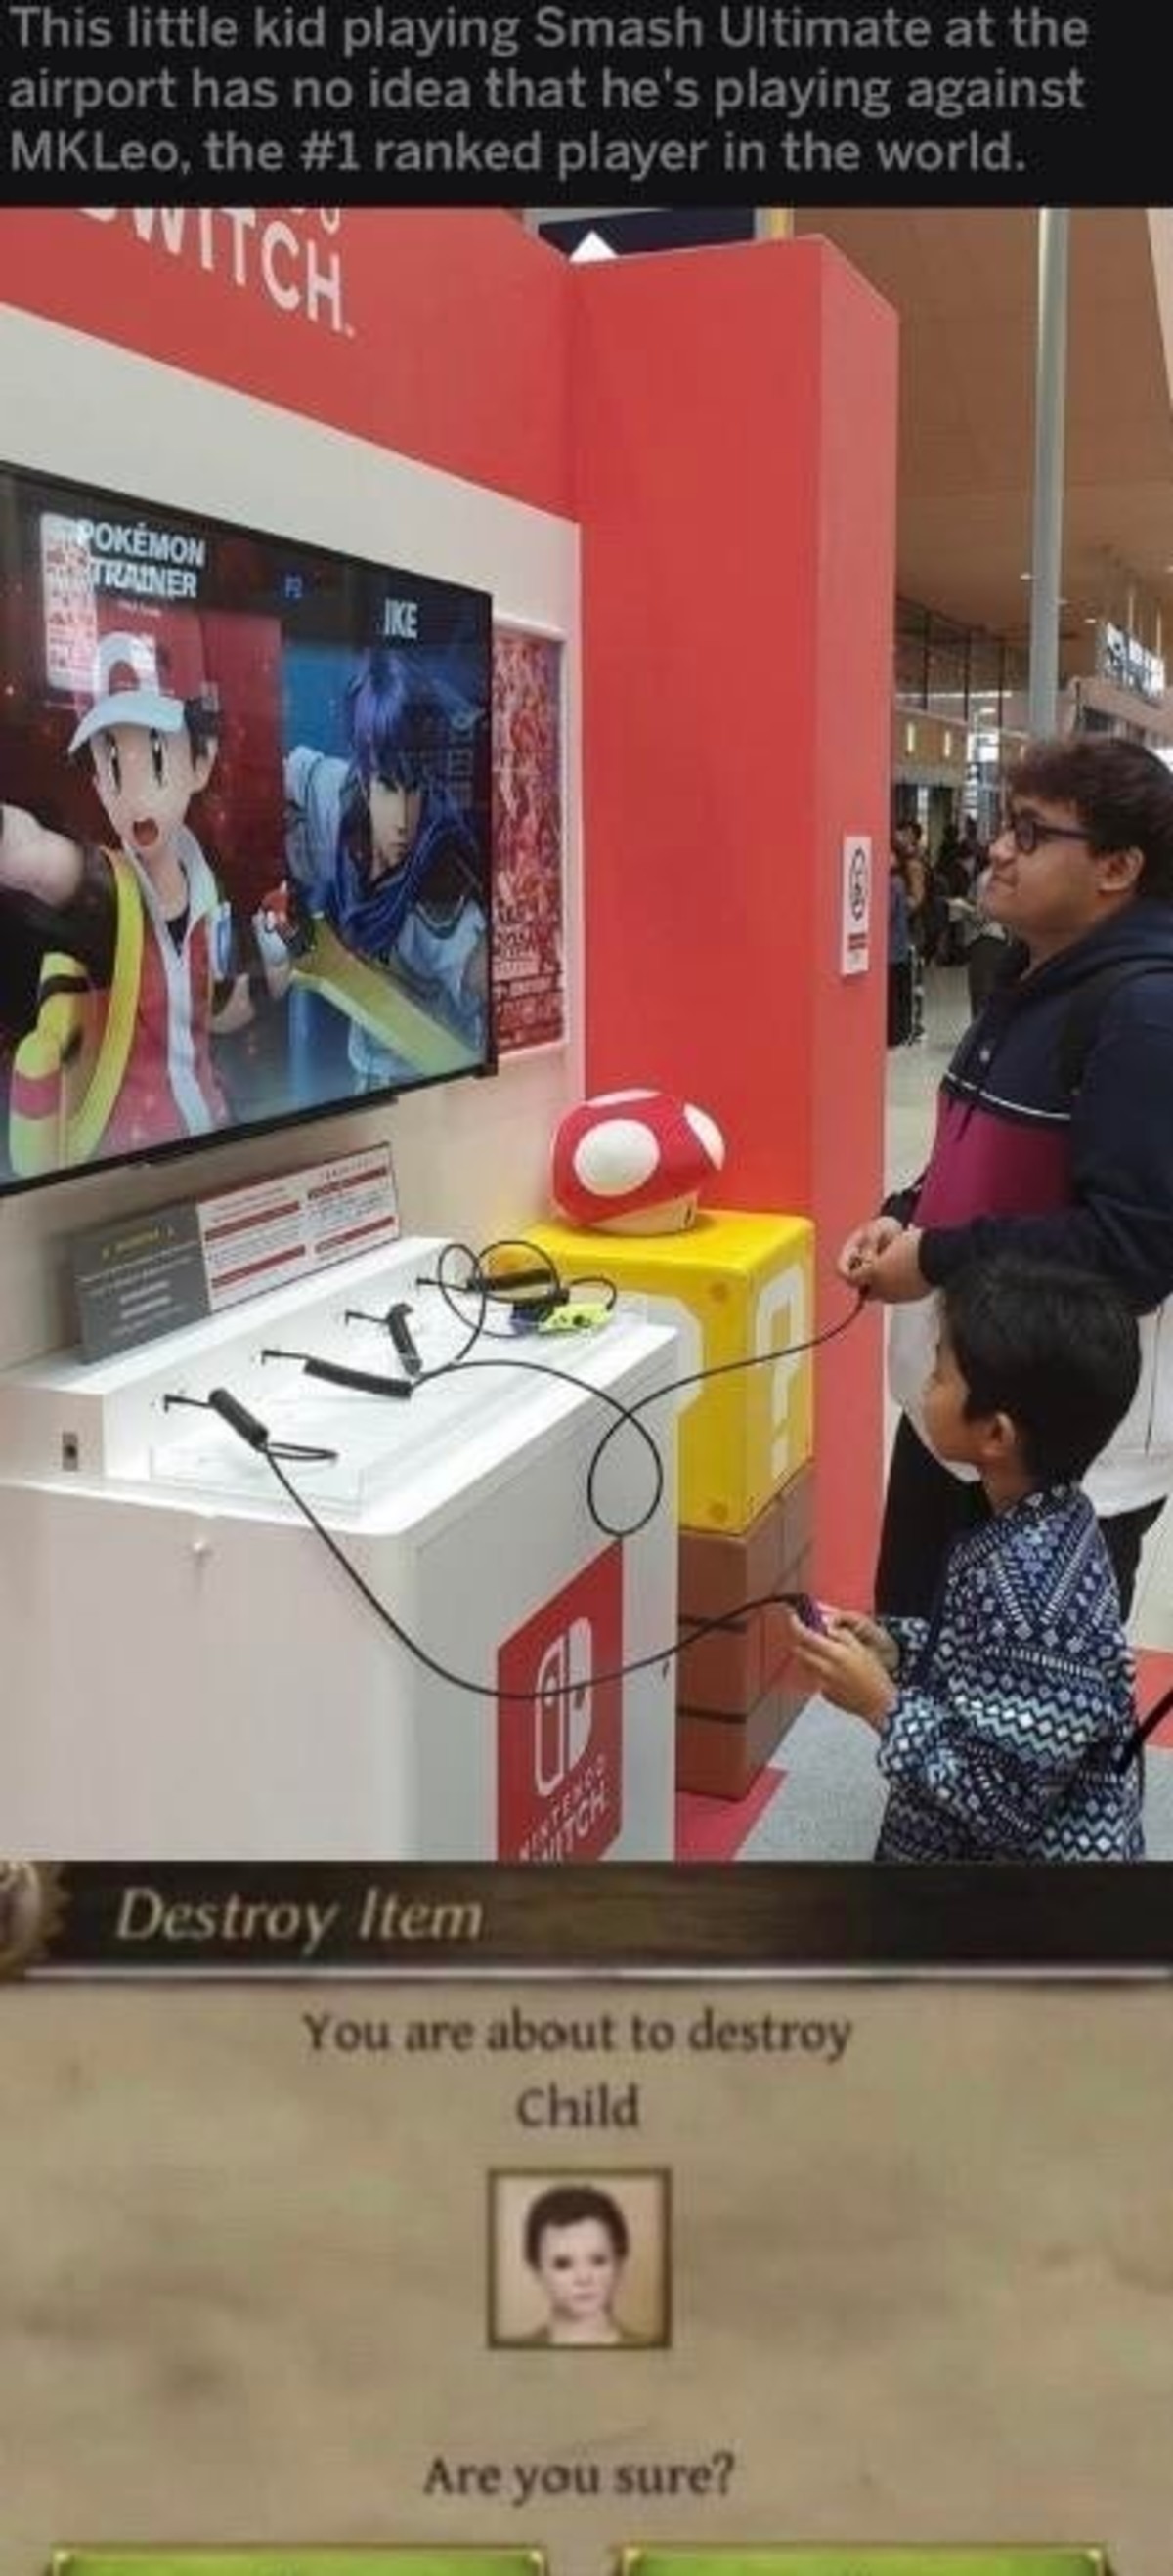 poster - This little kid playing Smash Ultimate at the airport has no idea that he's playing against MKLeo, the ranked player in the world. Tvitch Pokemon Trainer Destroy Item You are about to destroy Child Are you sure?